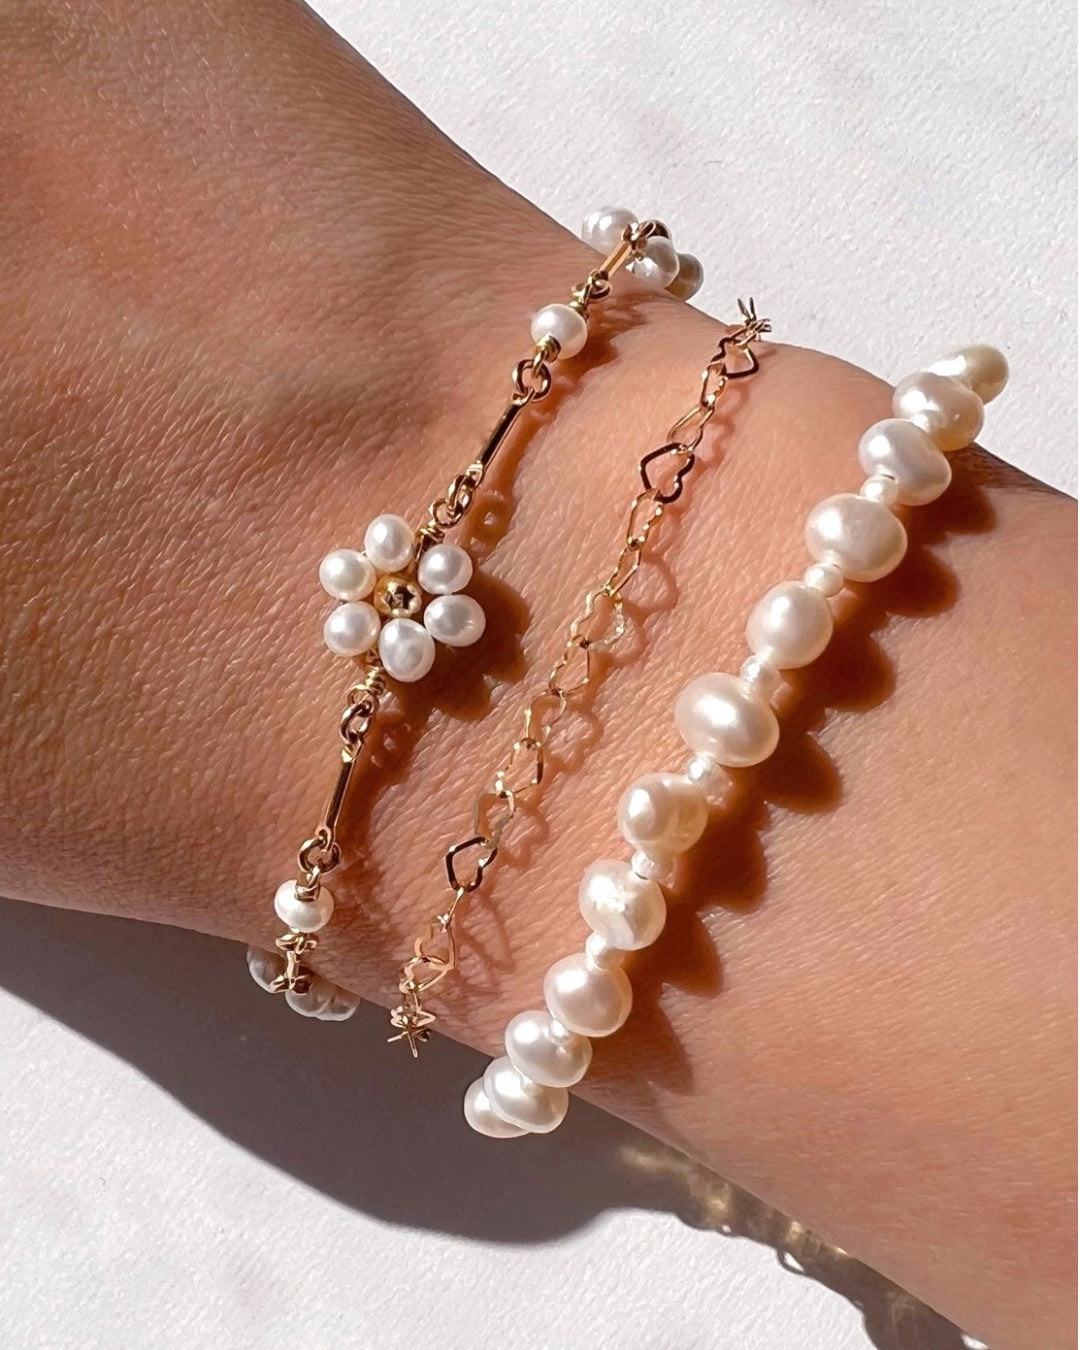 Freshwater Pearl Orb Bracelet stacked with Daisy Pearl Bracelet and Heart Link Bracelet 